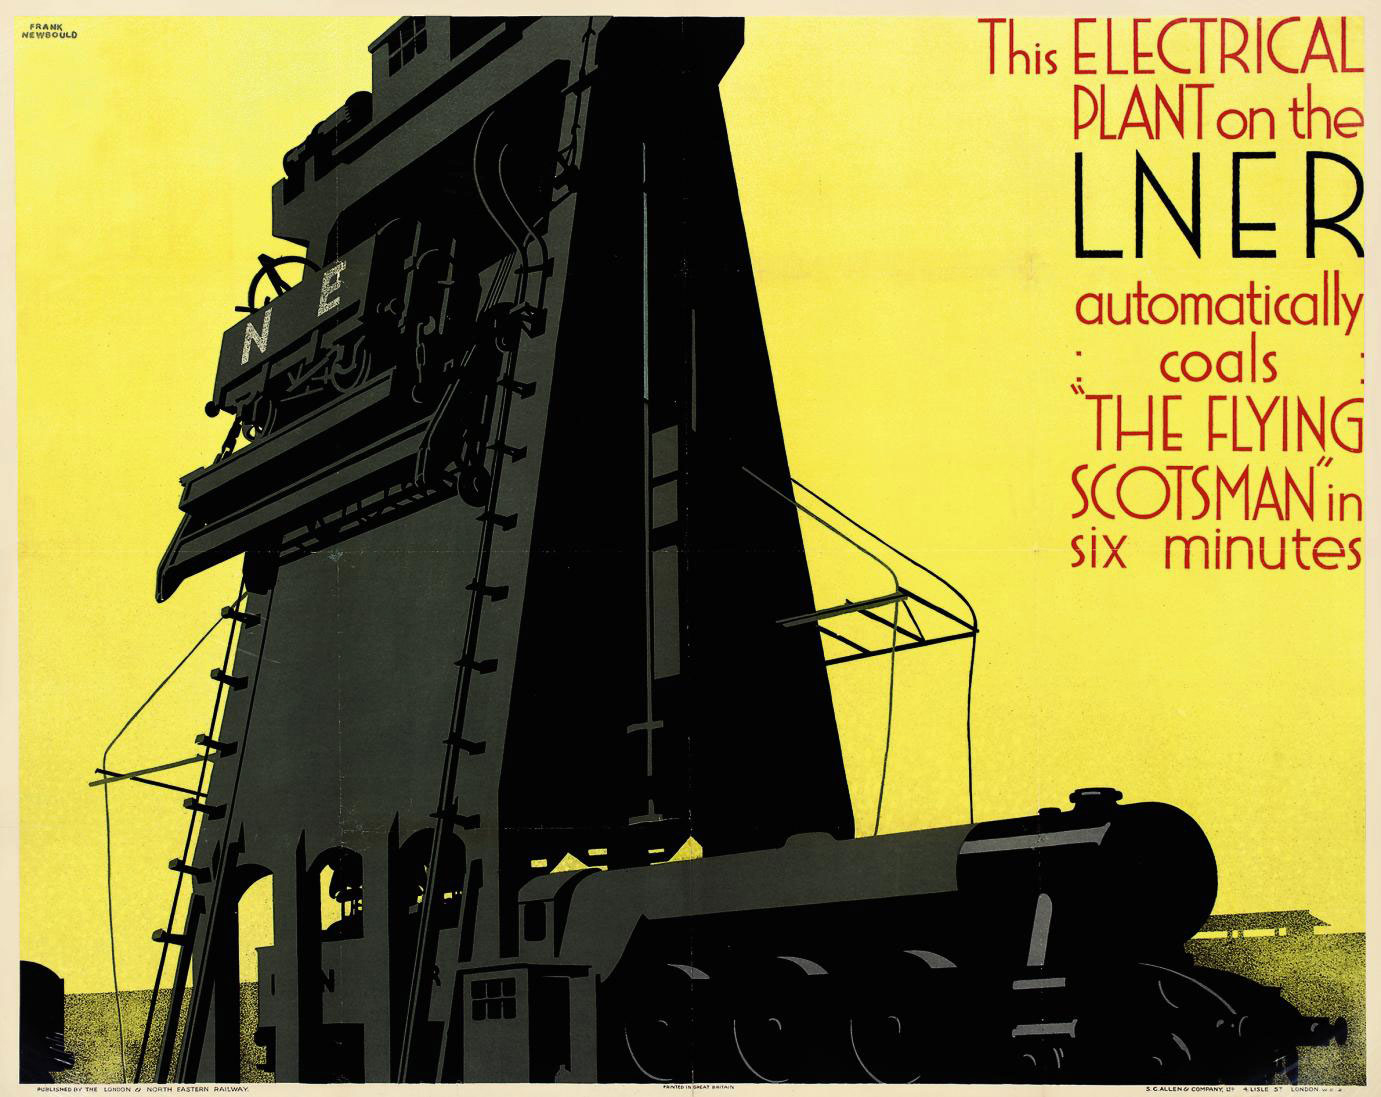 lithographic image of a huge electrical plant made of metal standing firmly against a yellow sky